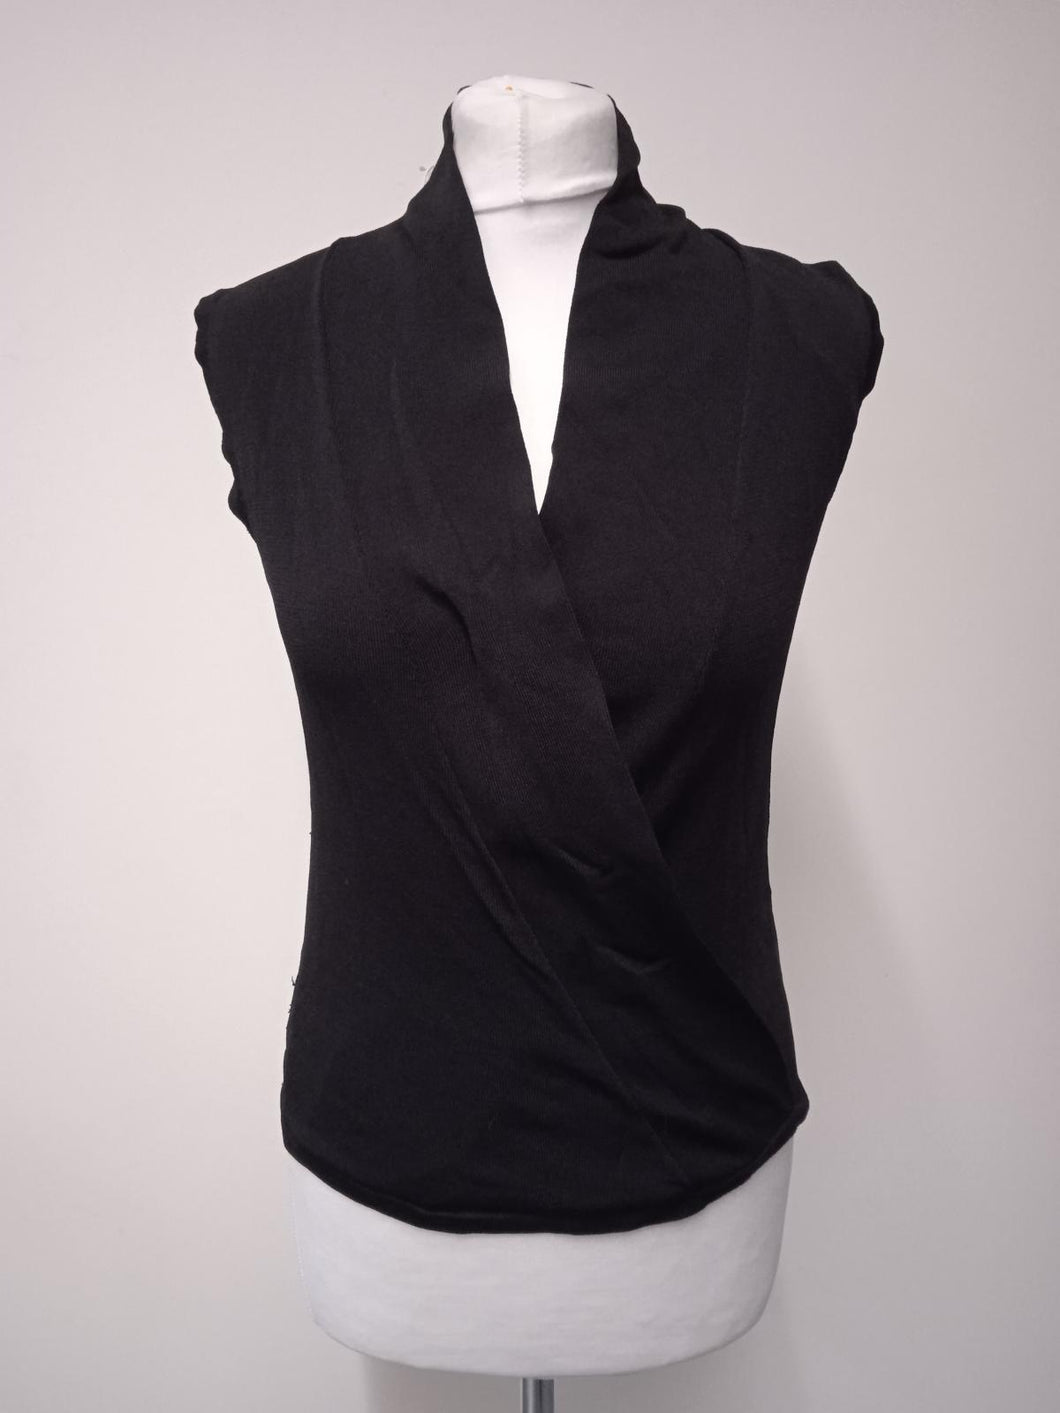 REISS Ladies Black Knitted Sleeveless Wrap Front Casual Gianni Top Size XS